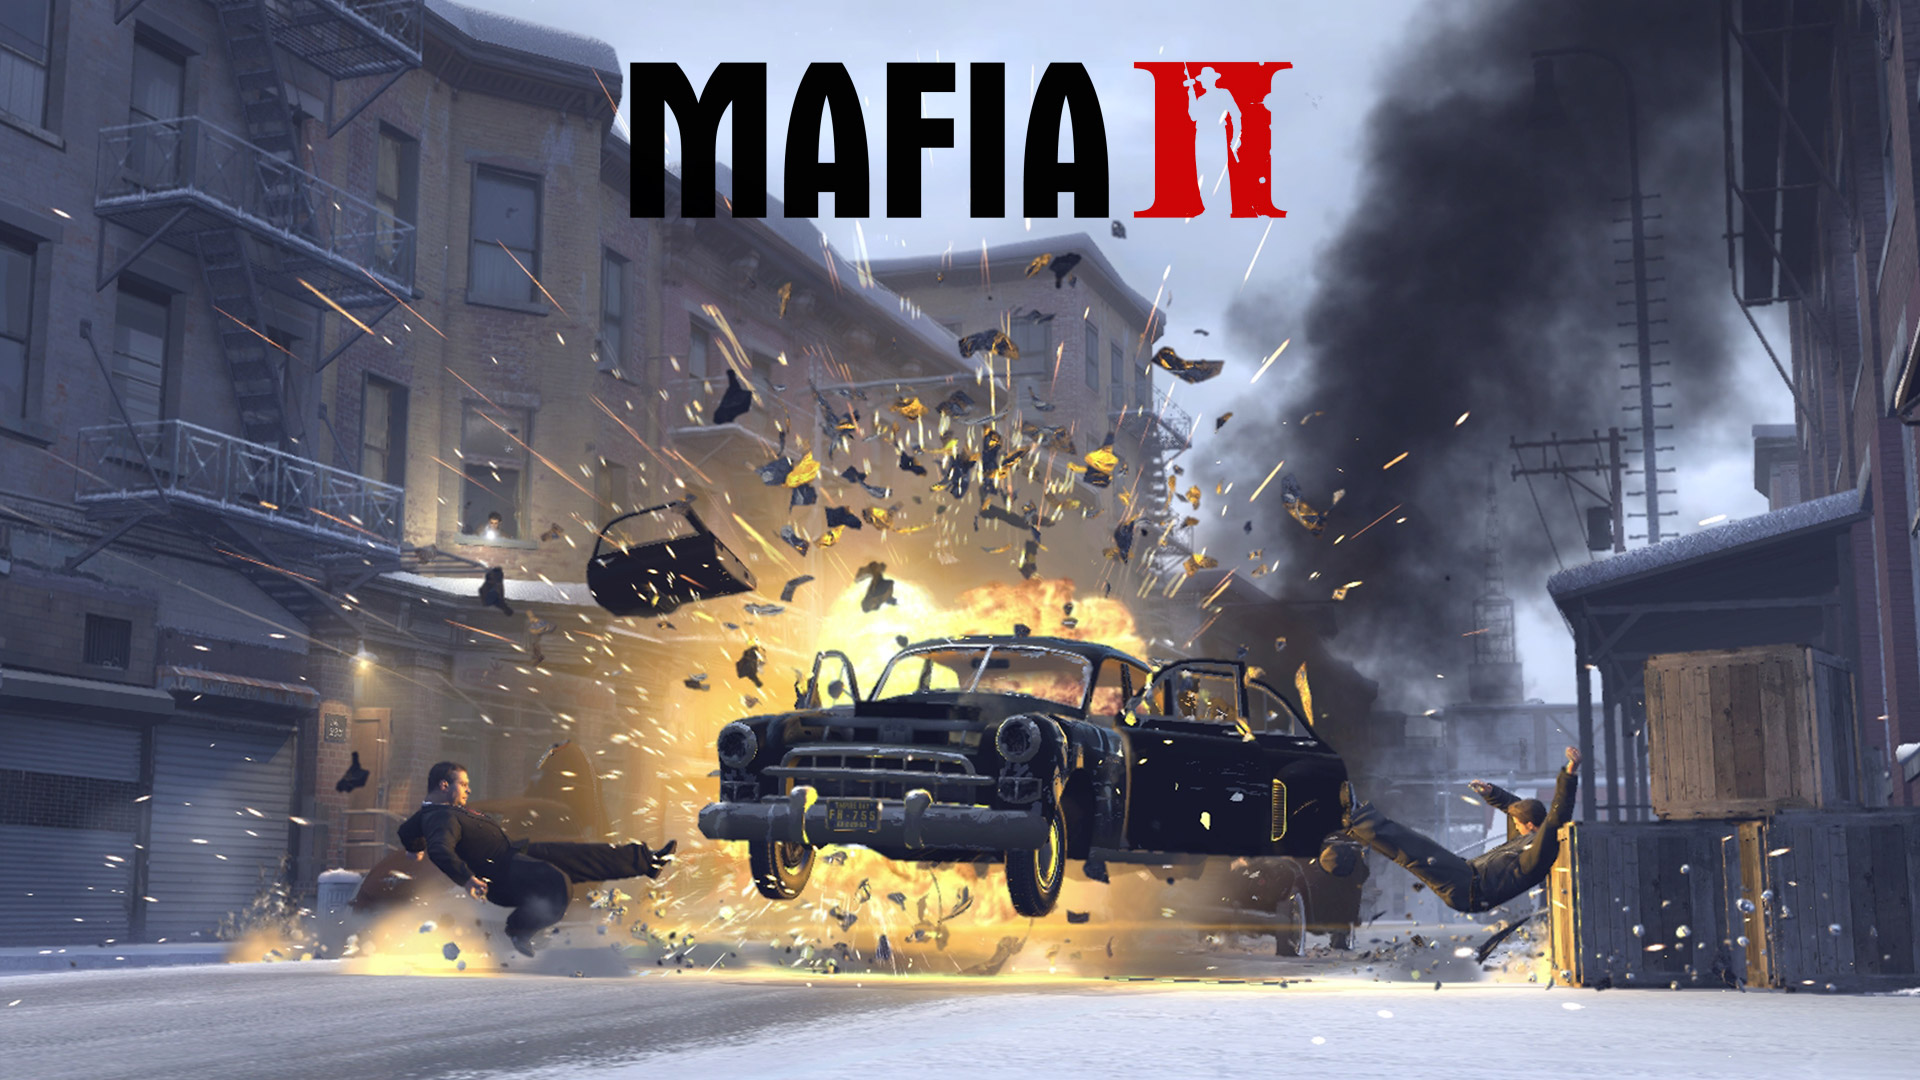 Related Pictures mafia ii wallpapers playstationwallpapers com